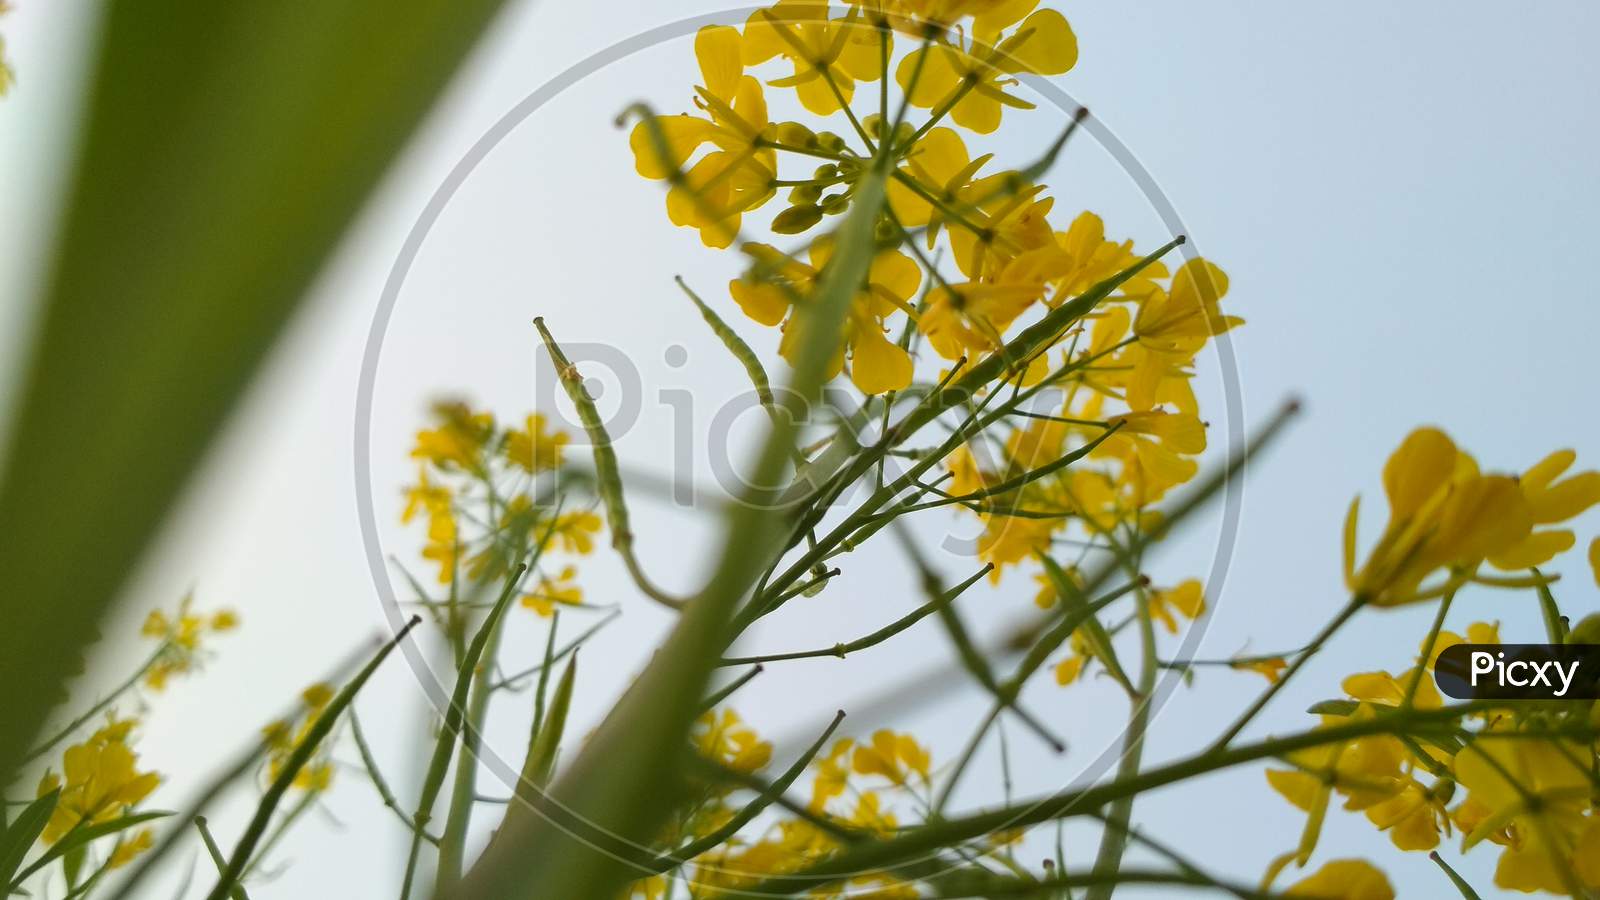 Cultivation Mustard plants and branches and flowers with sunlight effect,colour of yellow, and green Grass, 26/01/2020, West Bengal, India